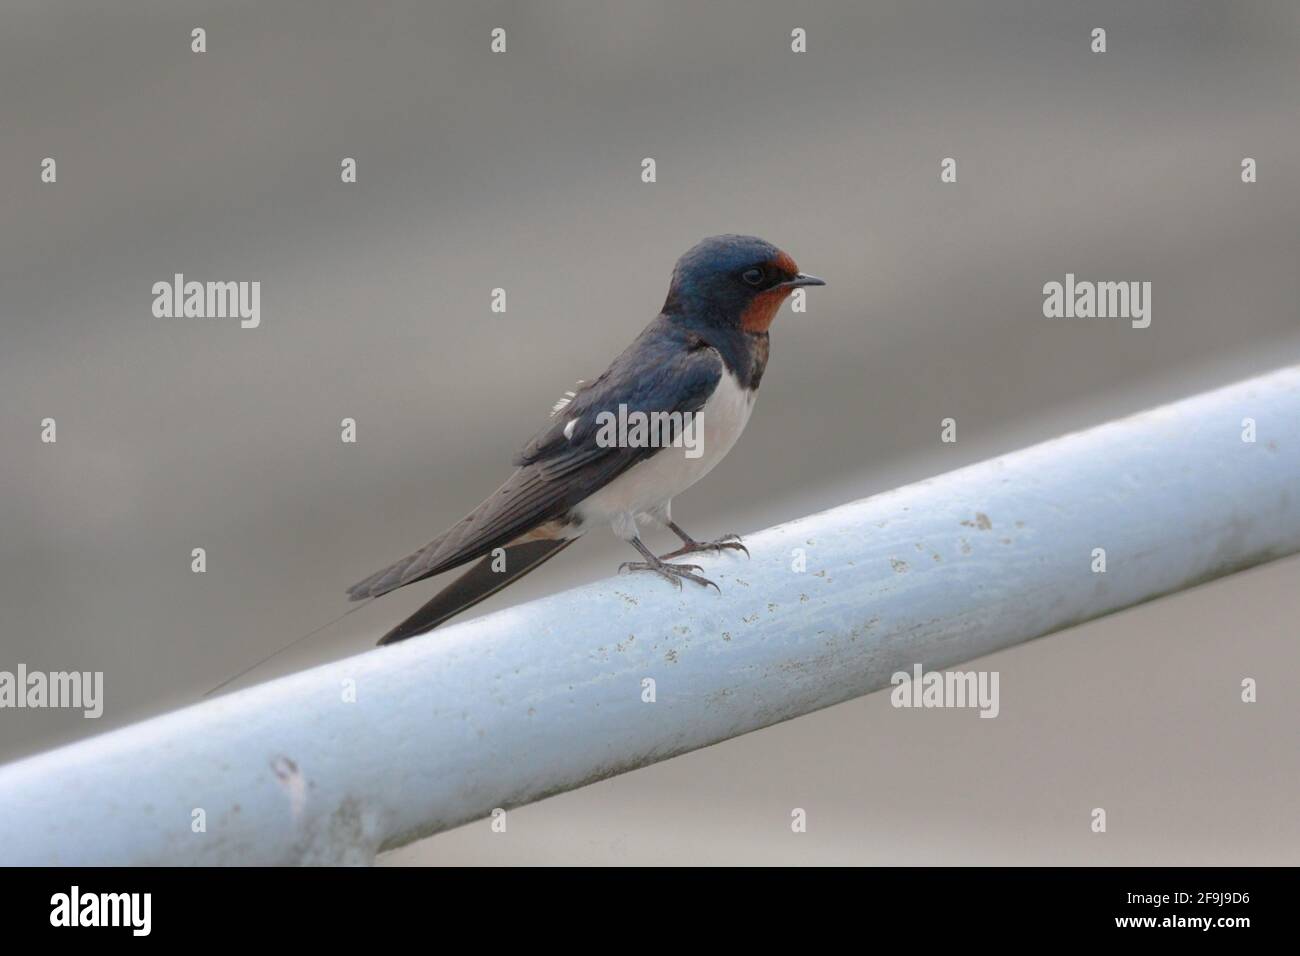 Barn Swallow (Hirundo rustica) perched on a steel fence at Varelerhafen, Germany Stock Photo